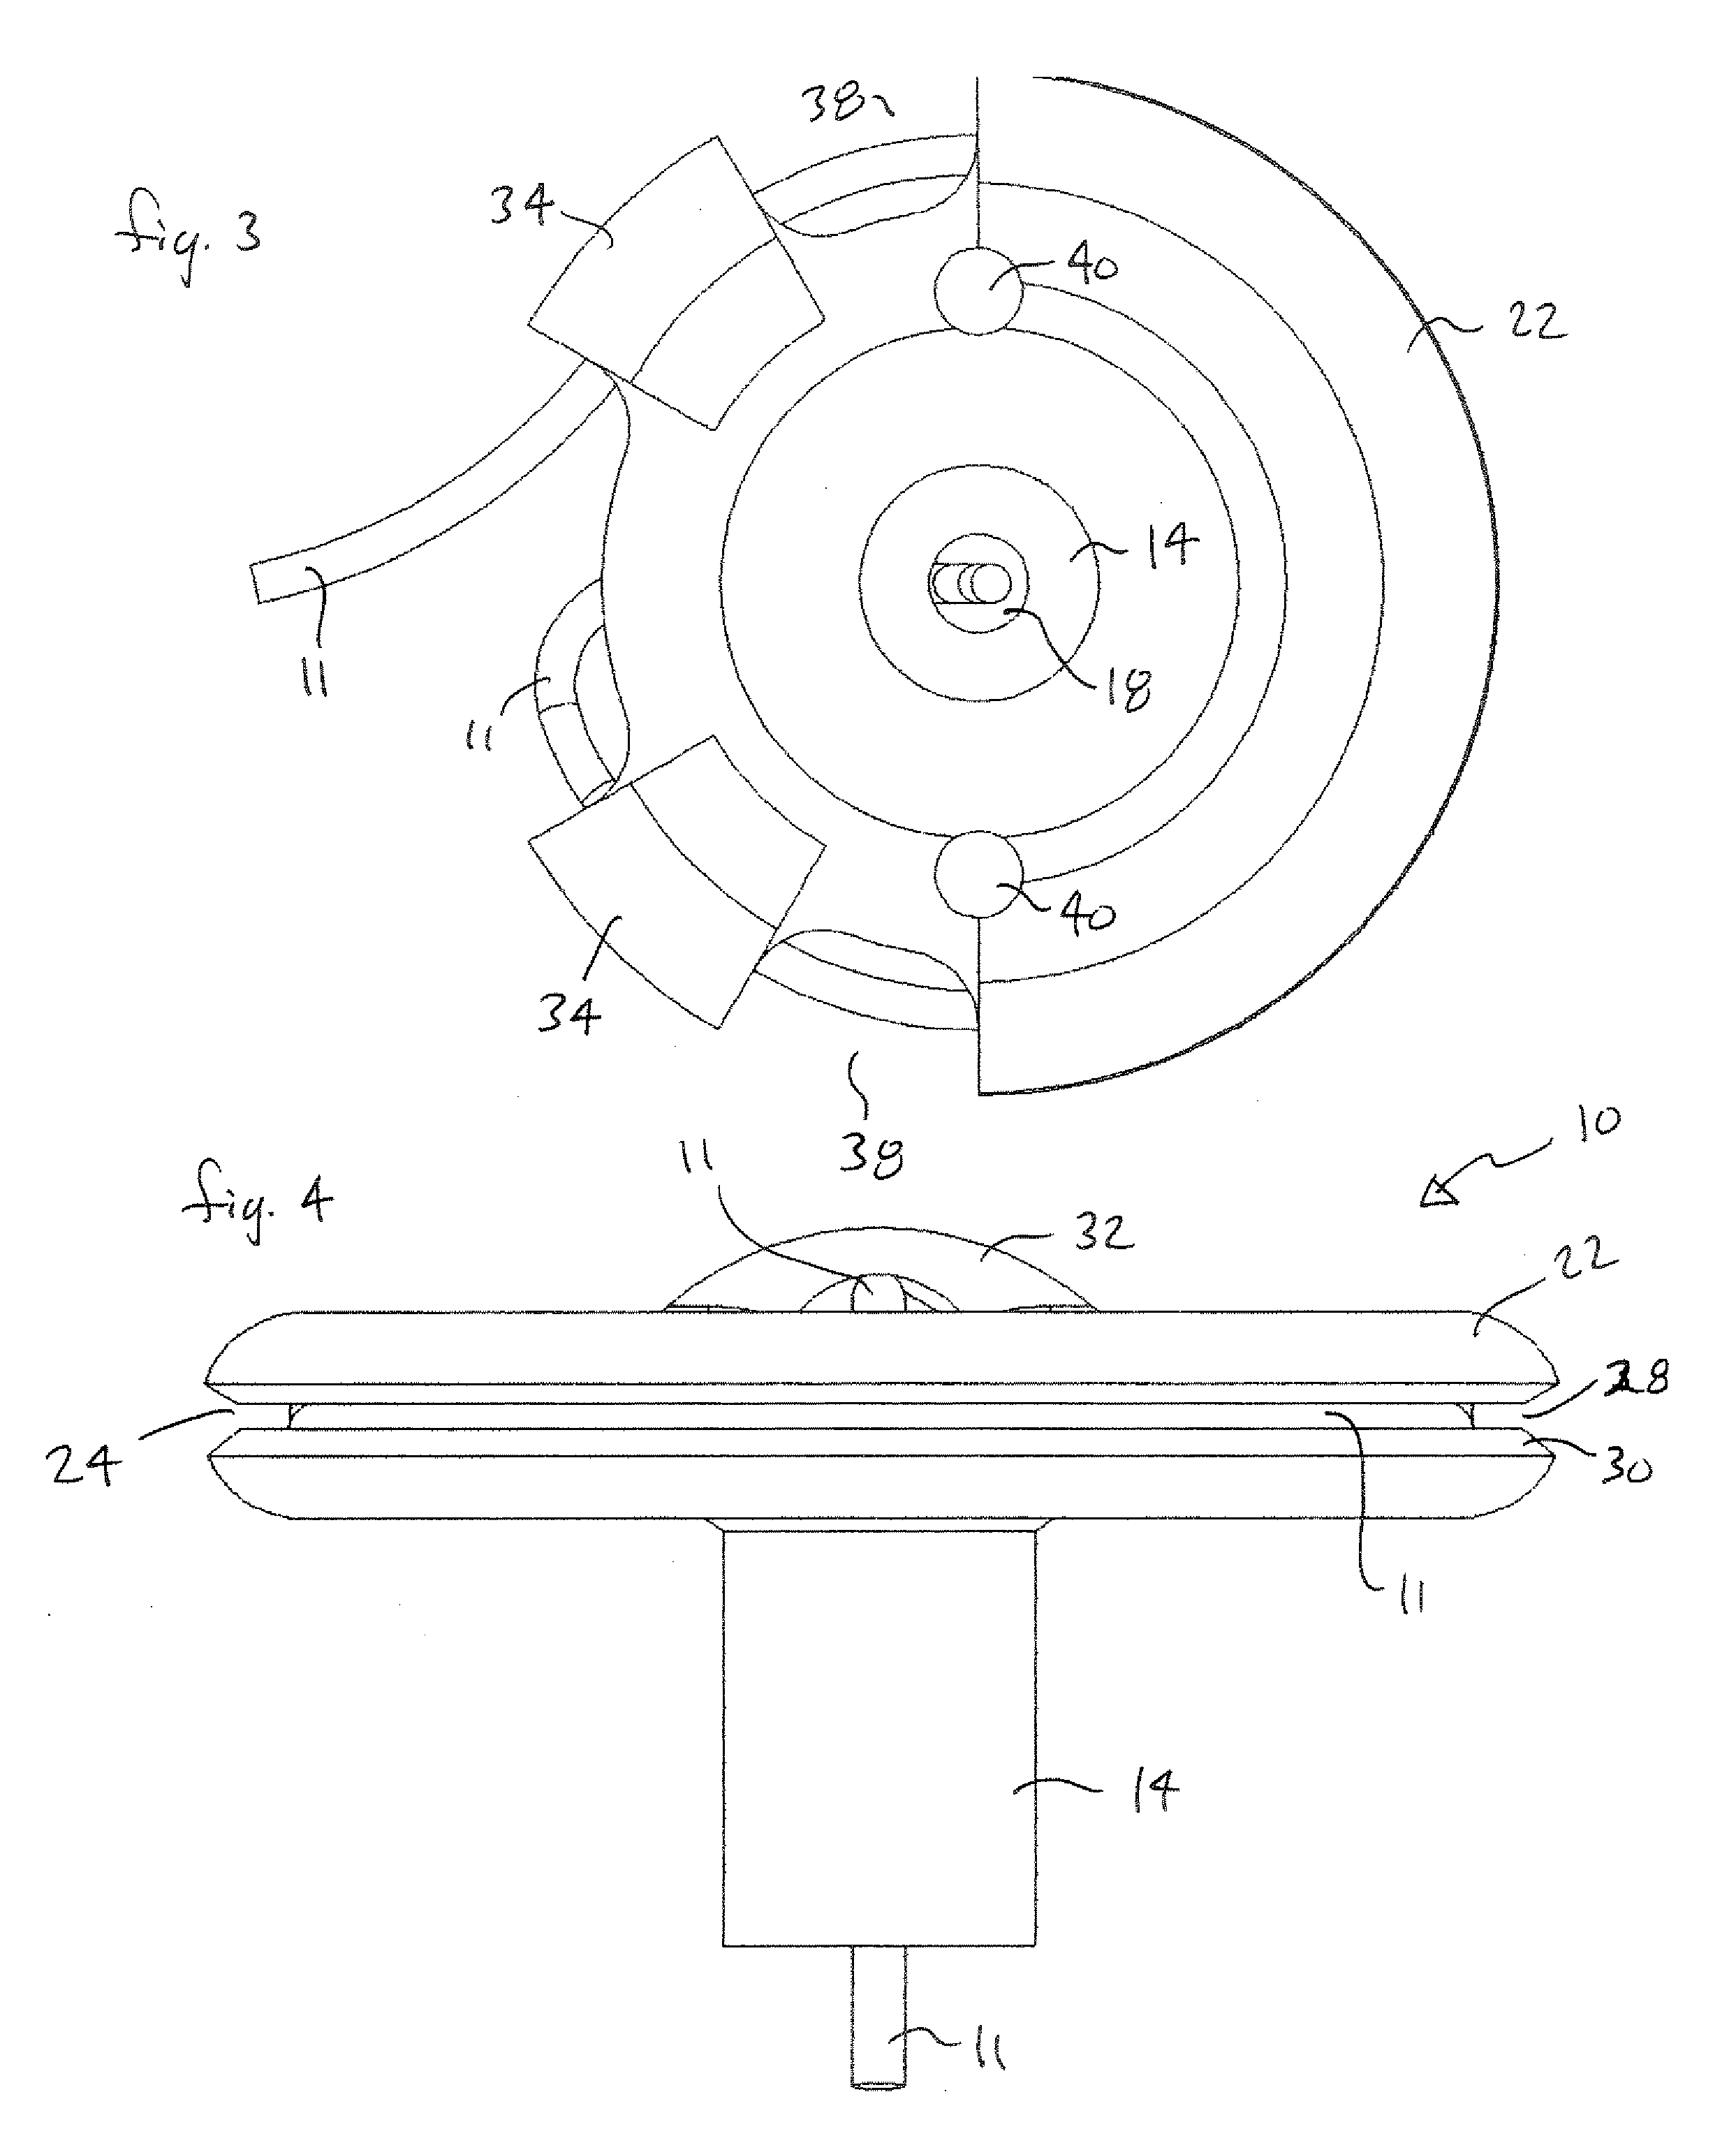 Anchoring device for securing intracranial catheter or lead wire to a patient's skull